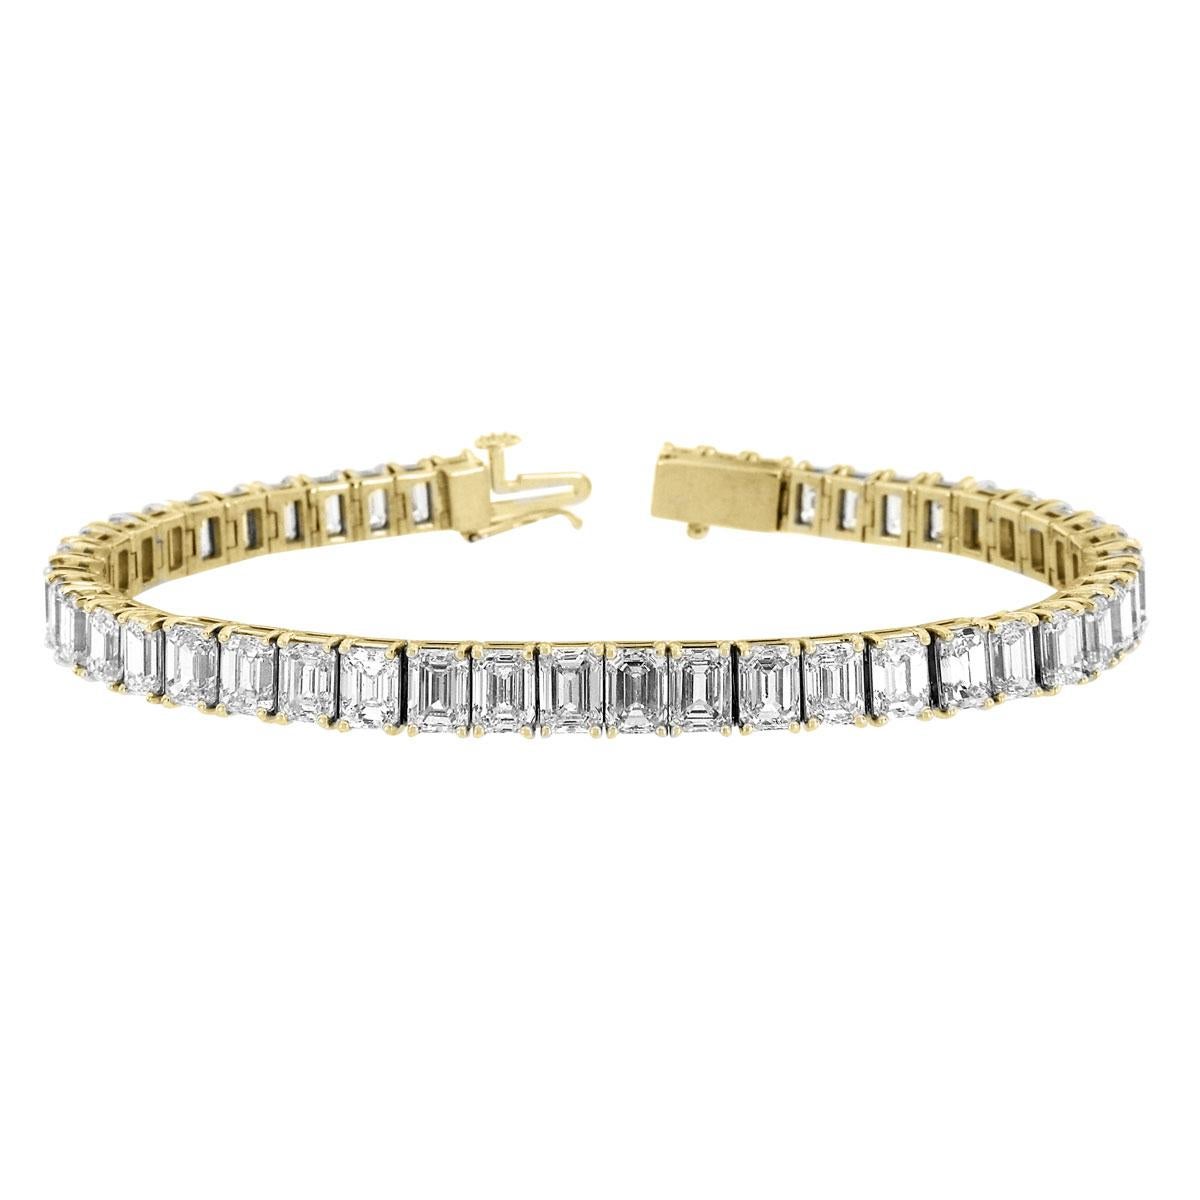 This timeless four prongs diamonds tennis bracelet feature 47 perfectly matched Emerald Shape Diamonds. Experience the Difference!e!

Product details: 

Center Gemstone Type: NATURAL DIAMOND
Center Gemstone Color: WHITE
Center Gemstone Shape: